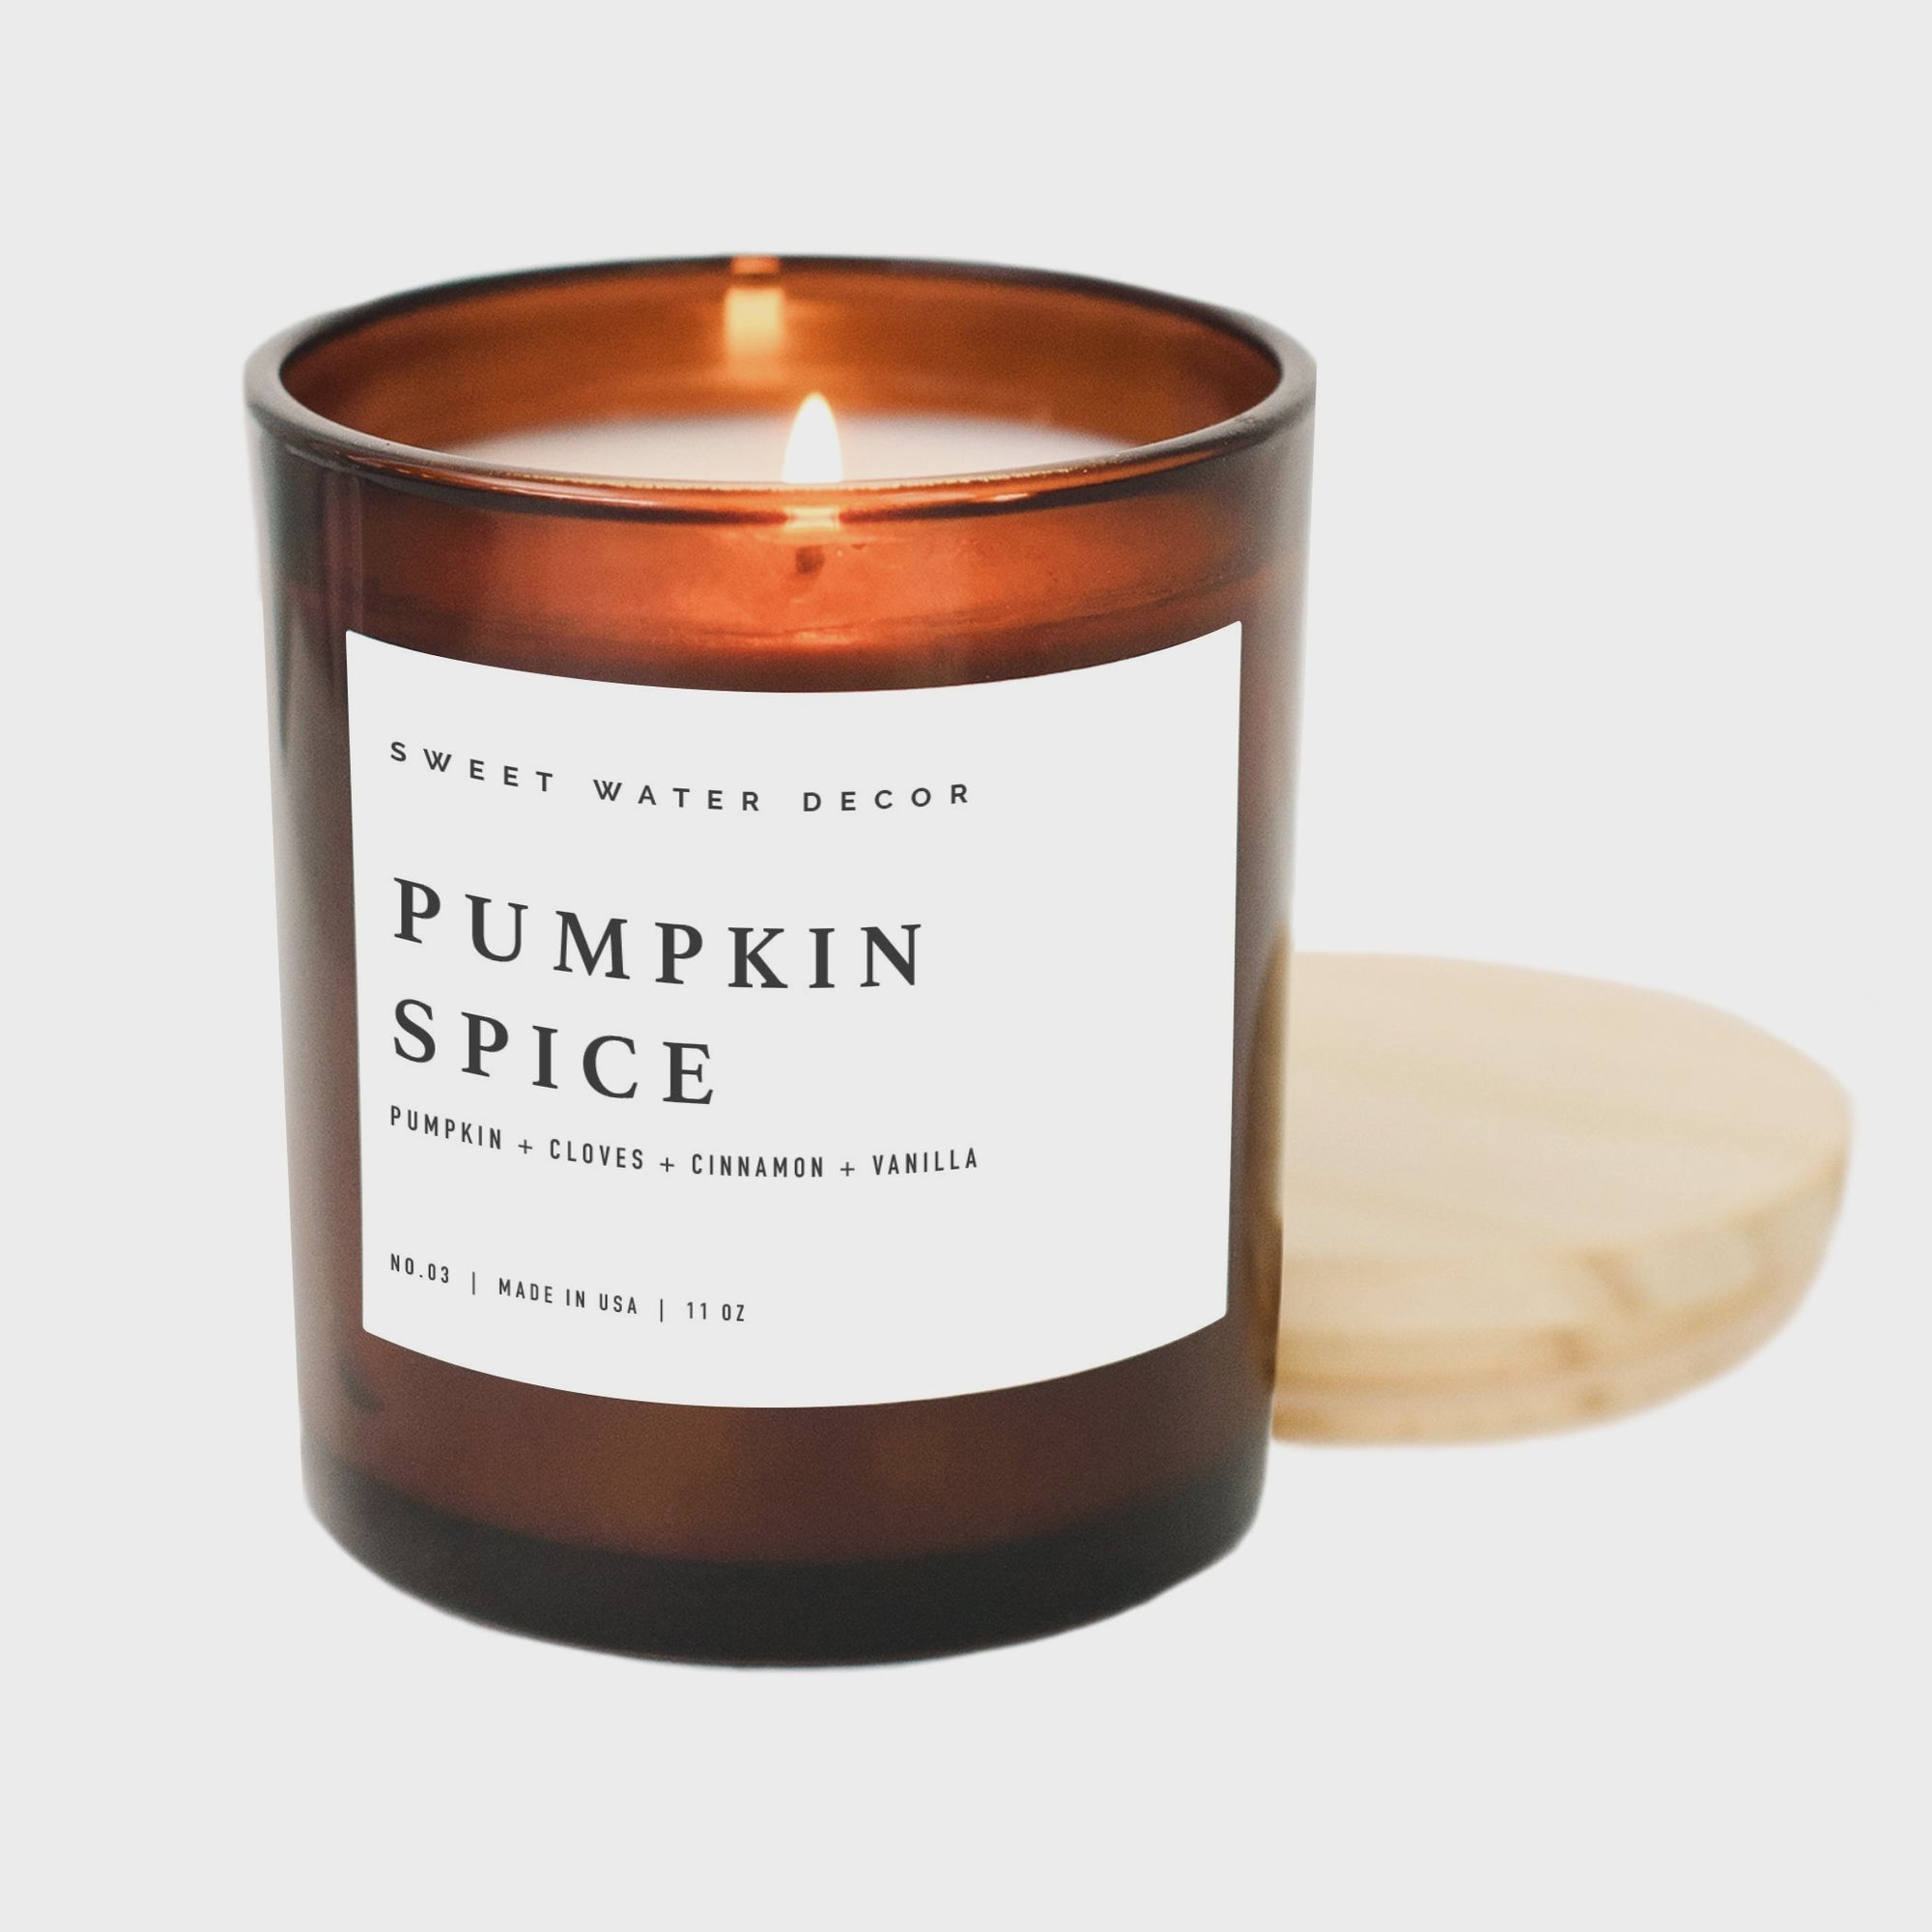 The Pumpkin Spice Candle in Amber Jar